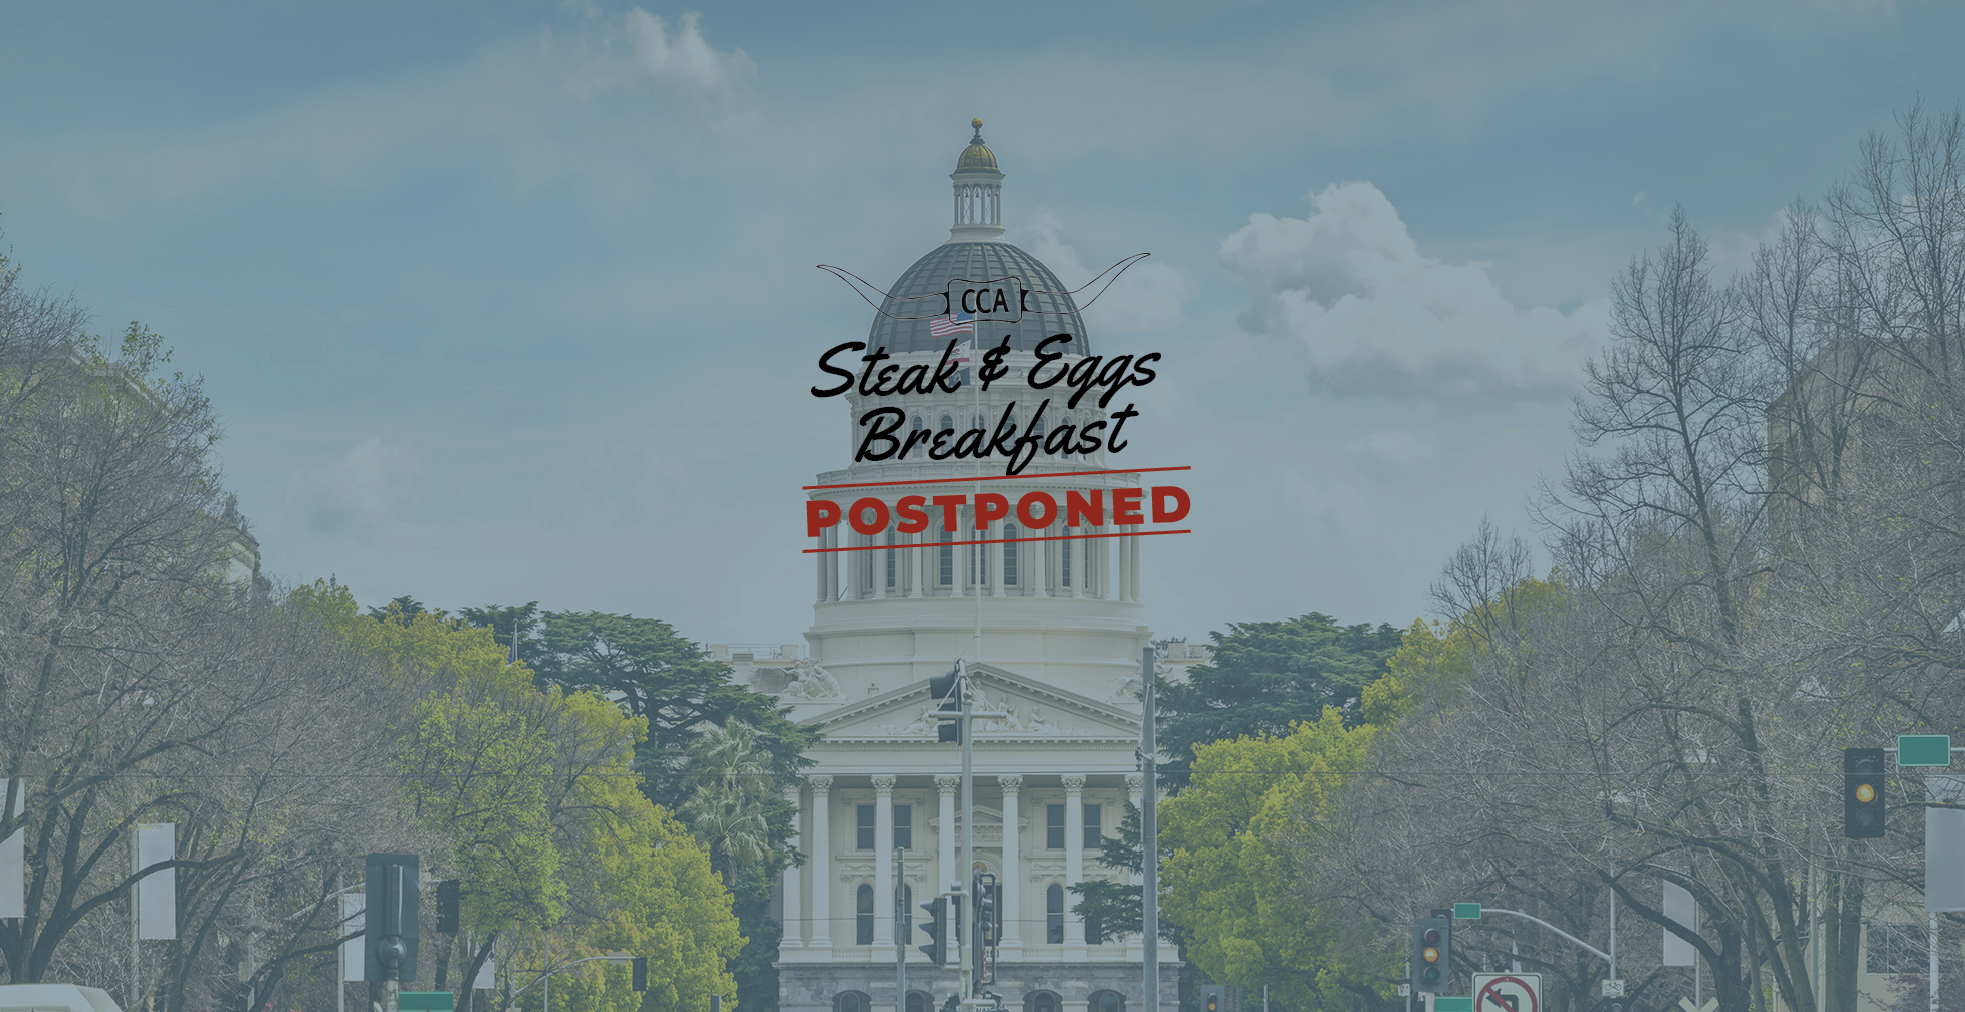 CCA has elected to postpone our Annual Steak & Eggs Breakfast, originally scheduled for Wednesday, March 25.